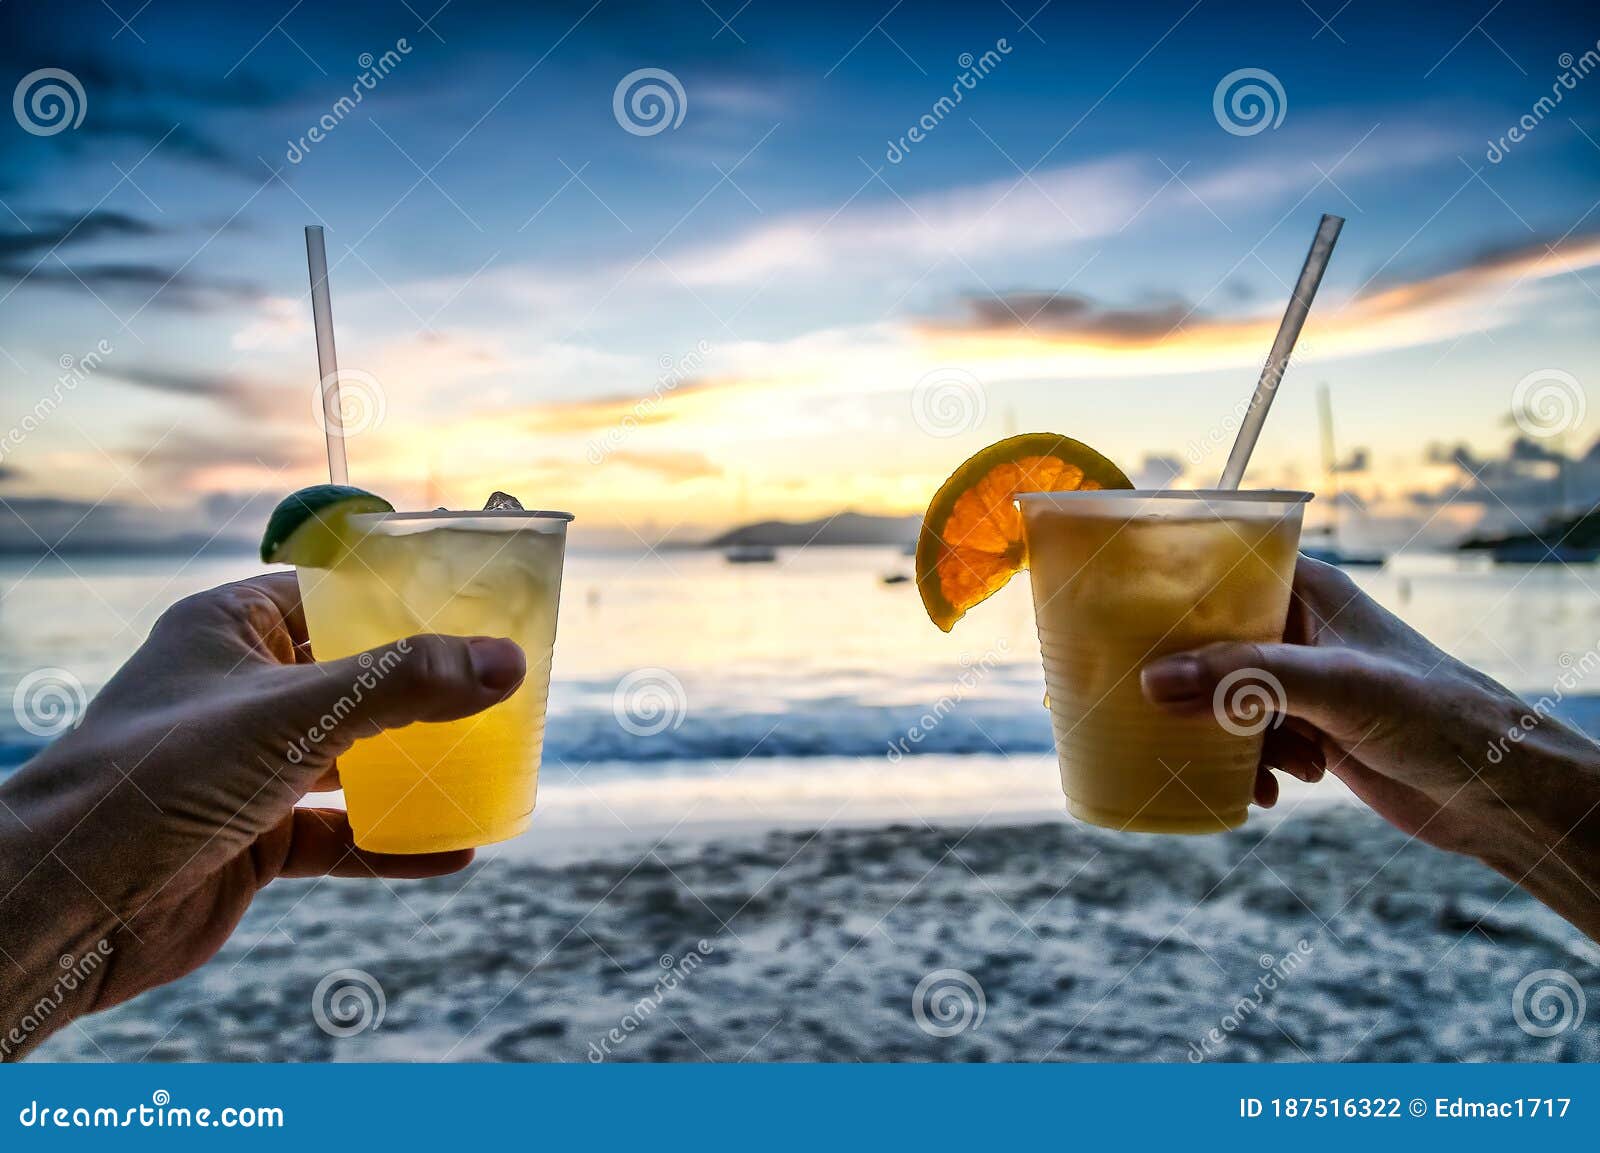 toasting with tropical drinks on the beach.